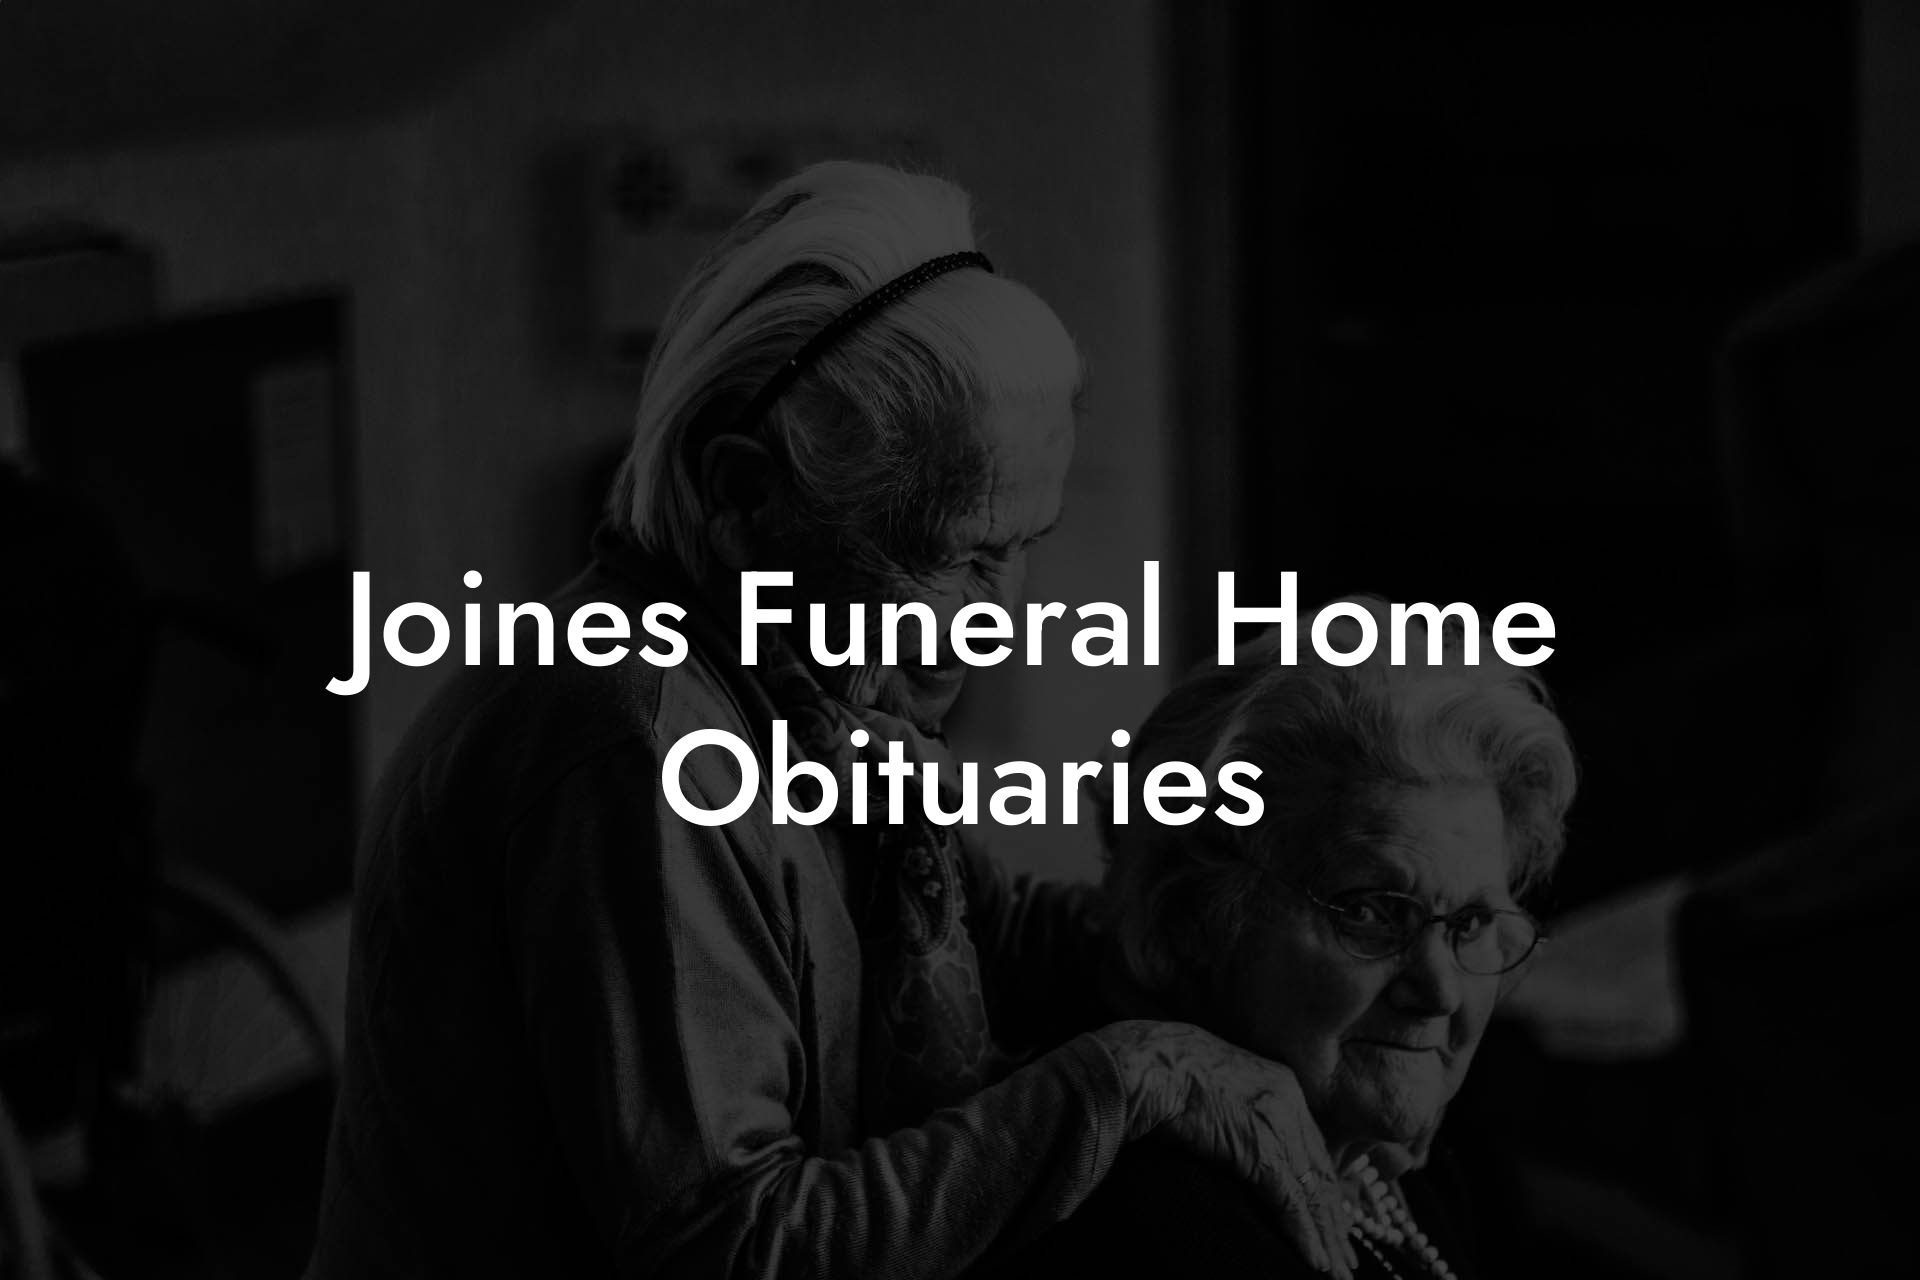 Joines Funeral Home Obituaries